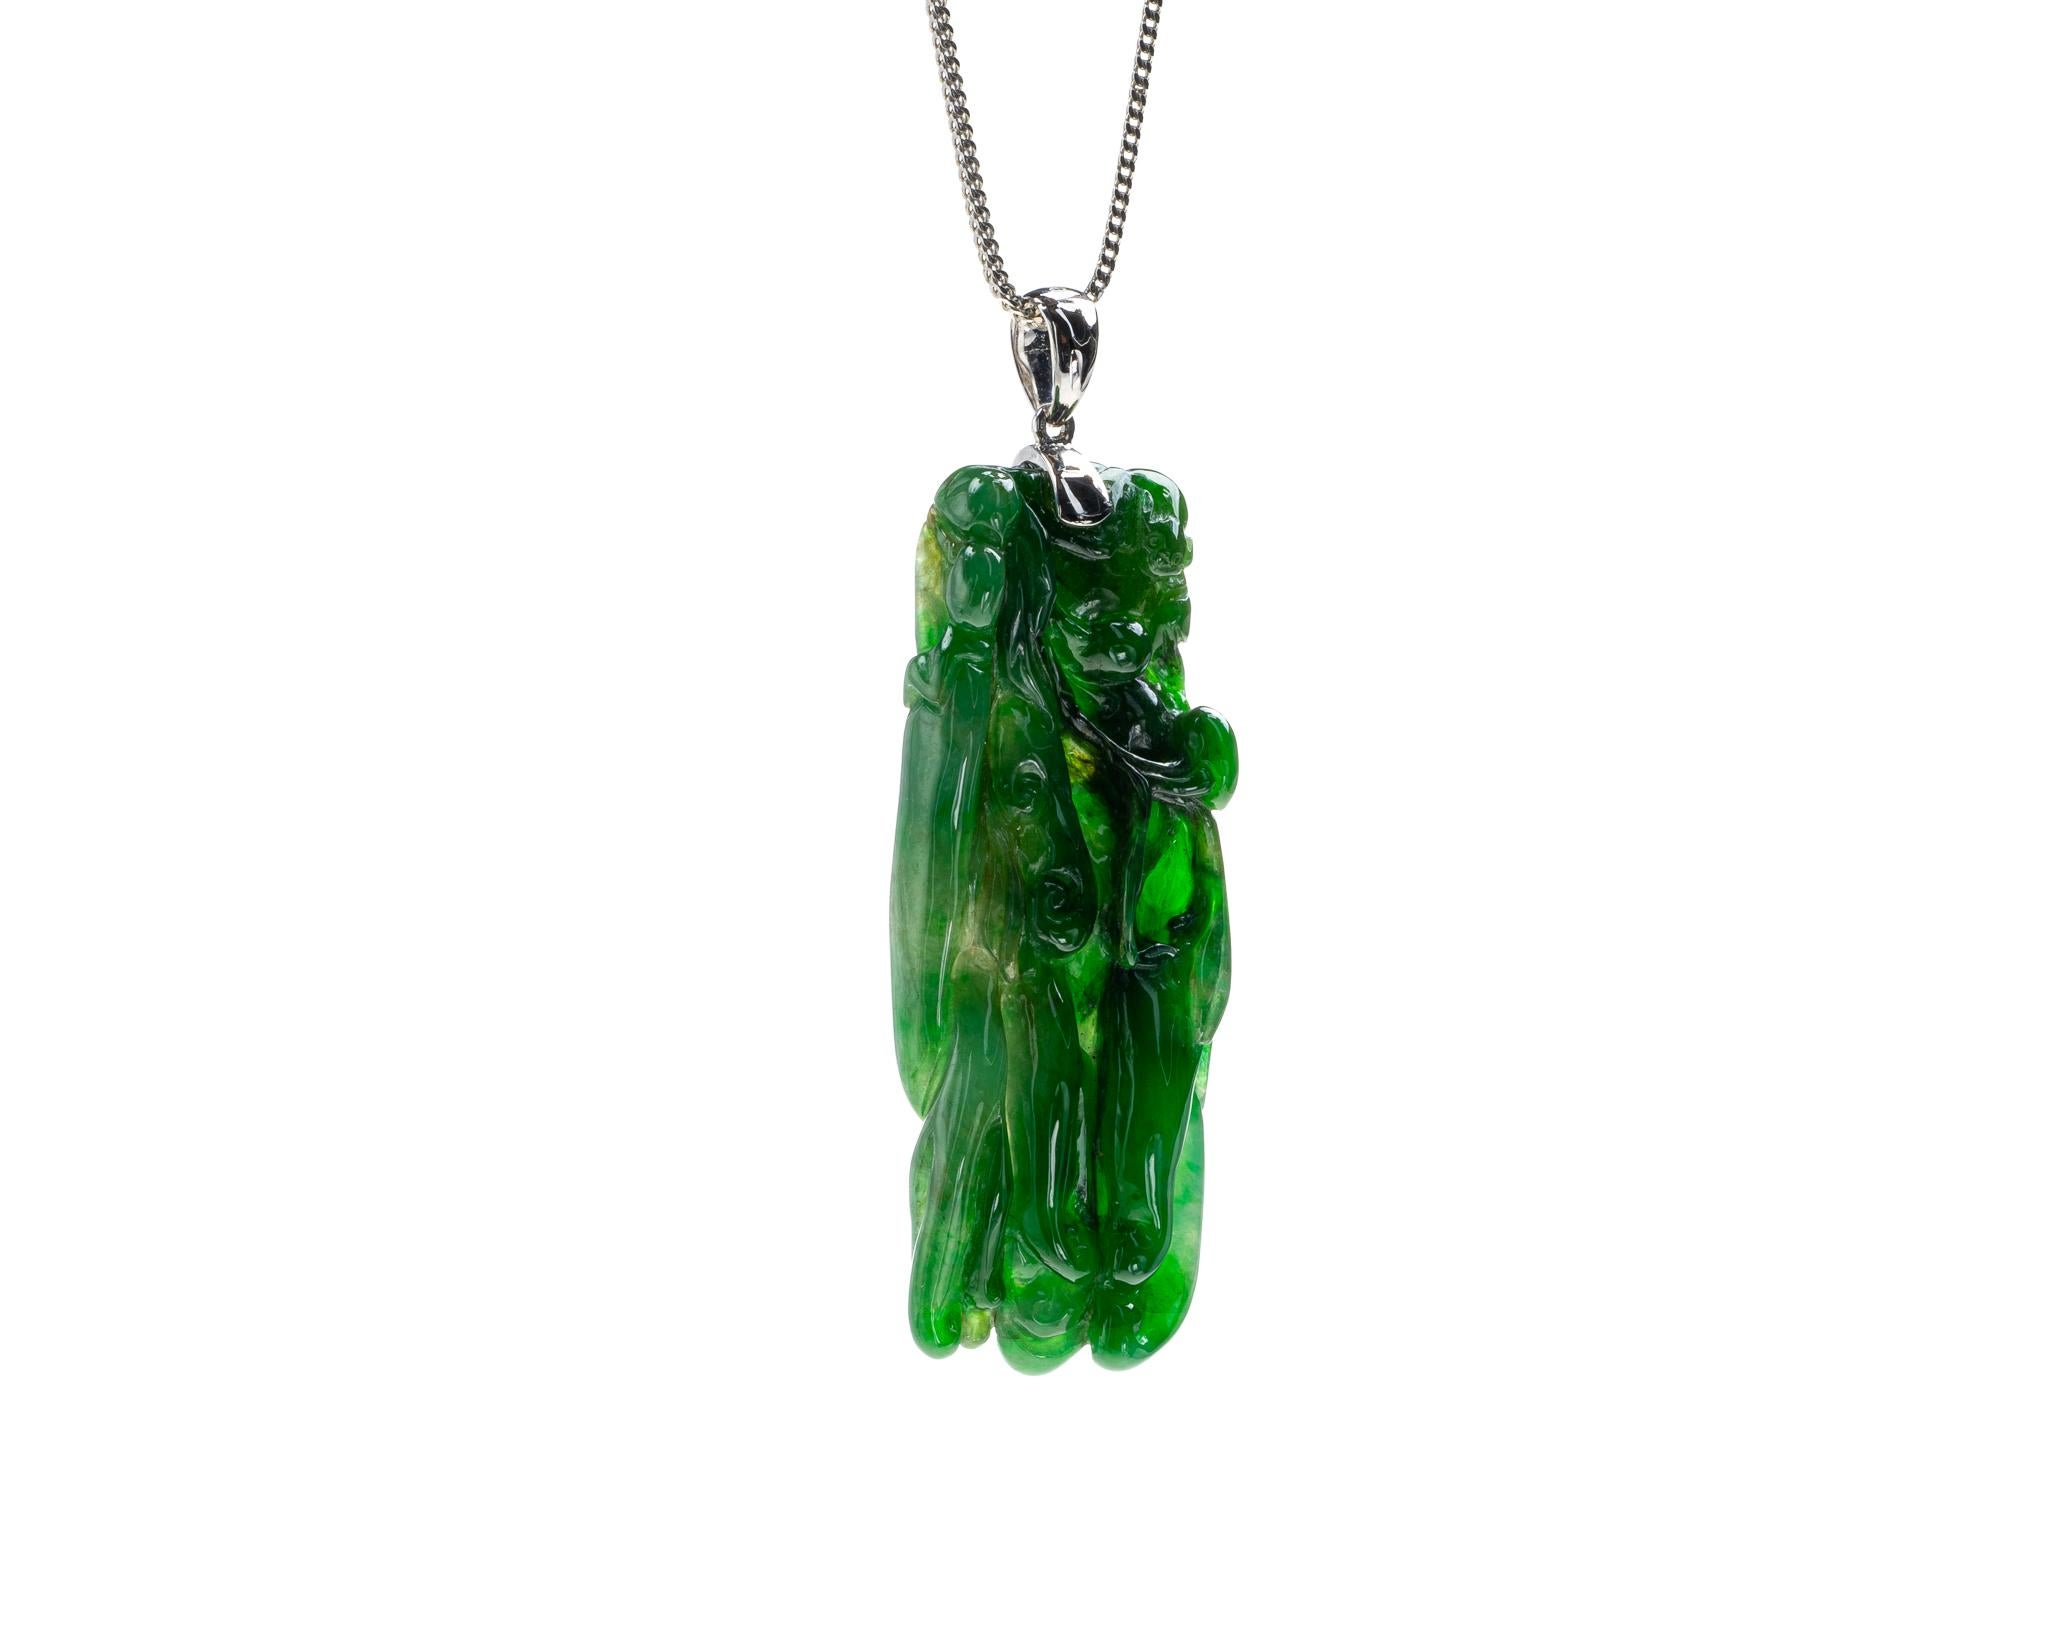 This is an all natural, untreated jadeite jade carved buddha hand pendant set on an 18K white gold  The carved buddha hand symbolizes happiness, longevity and good fortune. 

It measures 1.85 inches (47mm ) x 0.73 inches (18.7 mm) with thickness of